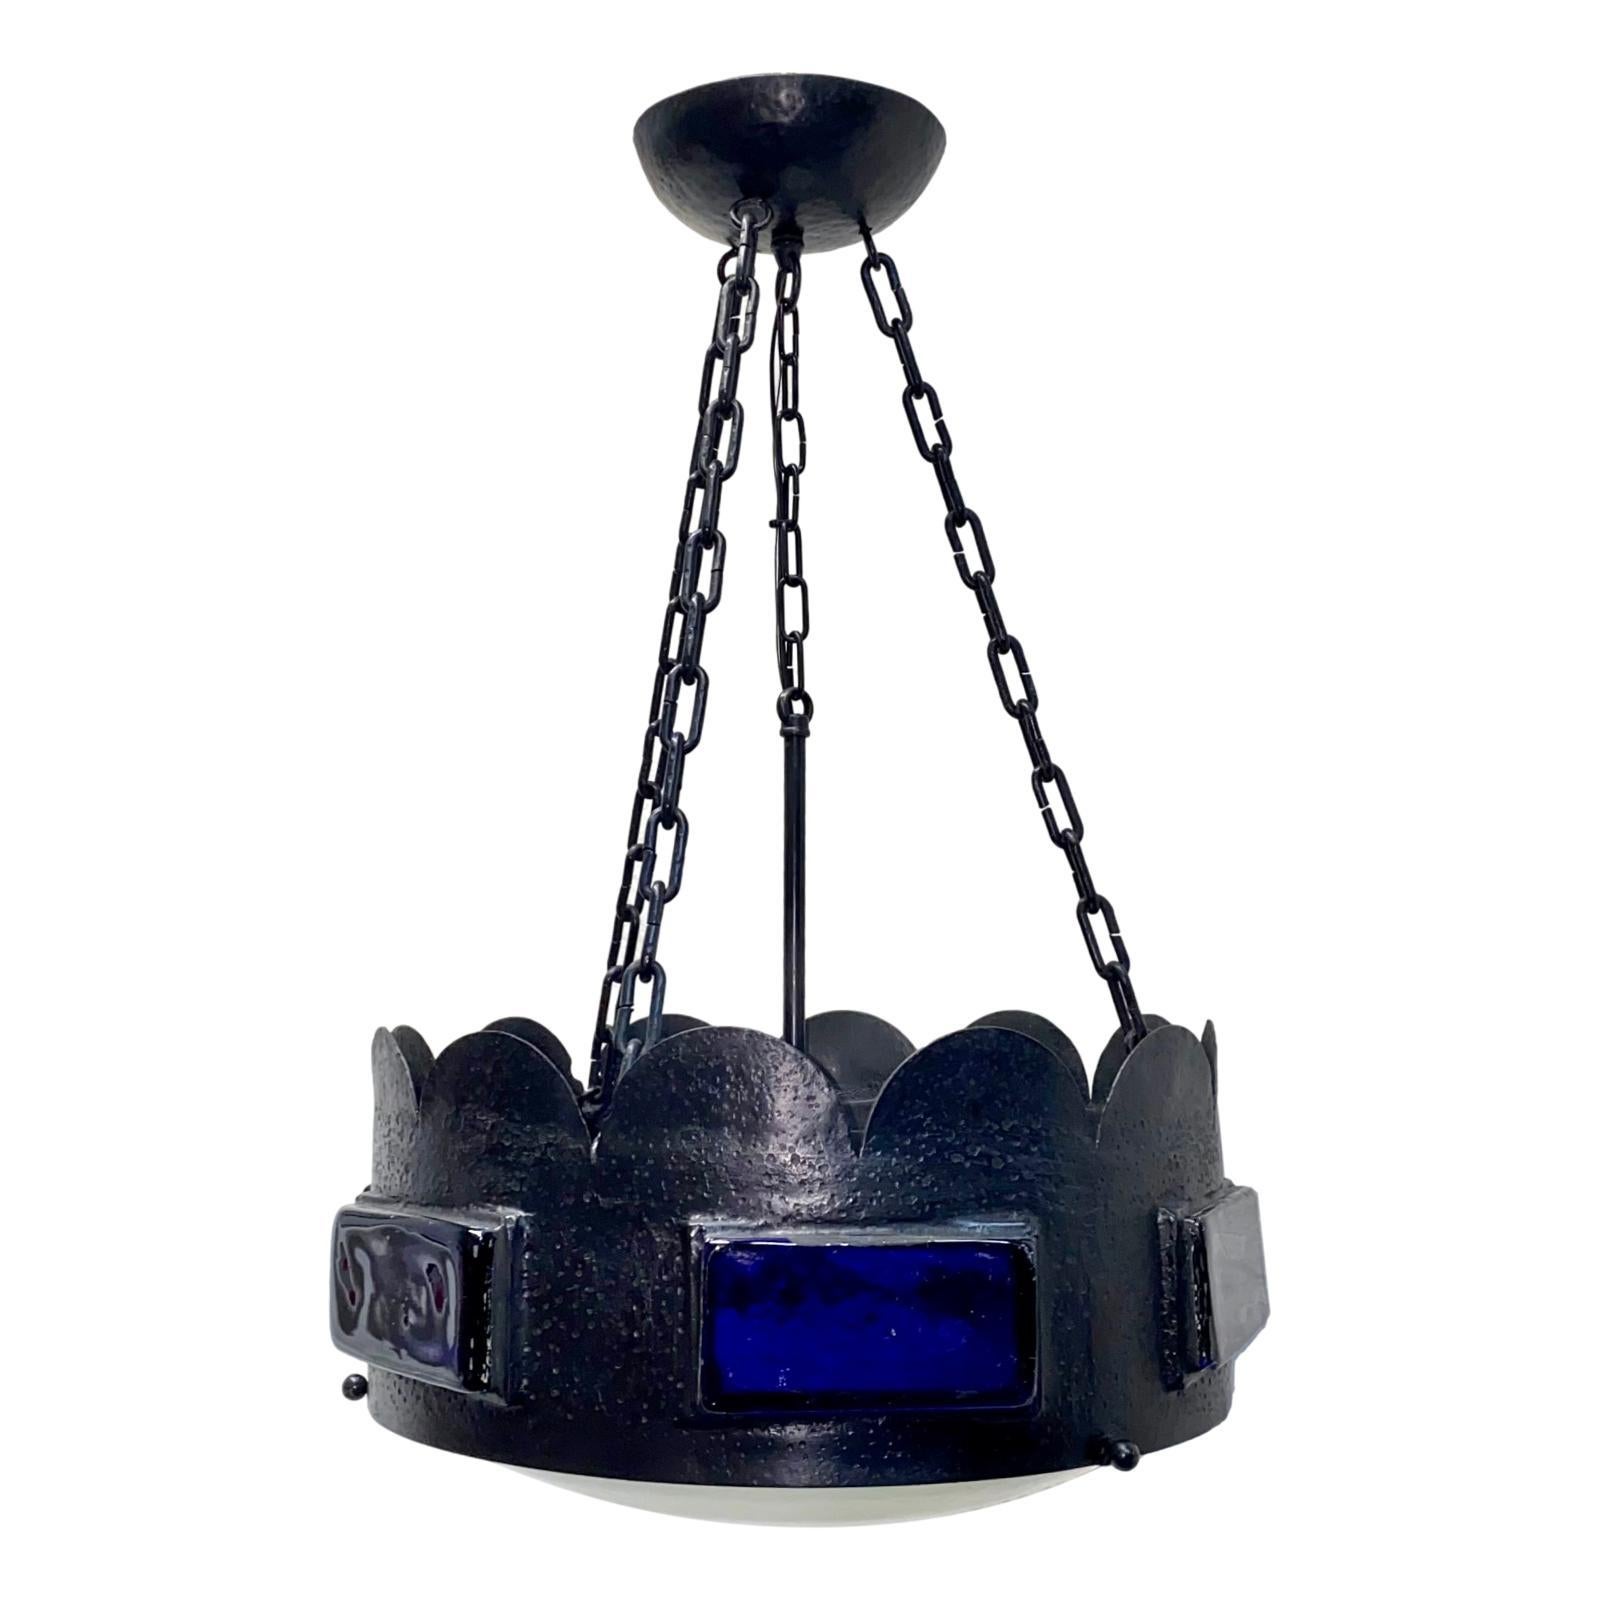 A circa 1920's English light fixture with cobalt blue glass insets, glass diffuser at the bottom and four interior lights.

Measurements:
Drop: 31